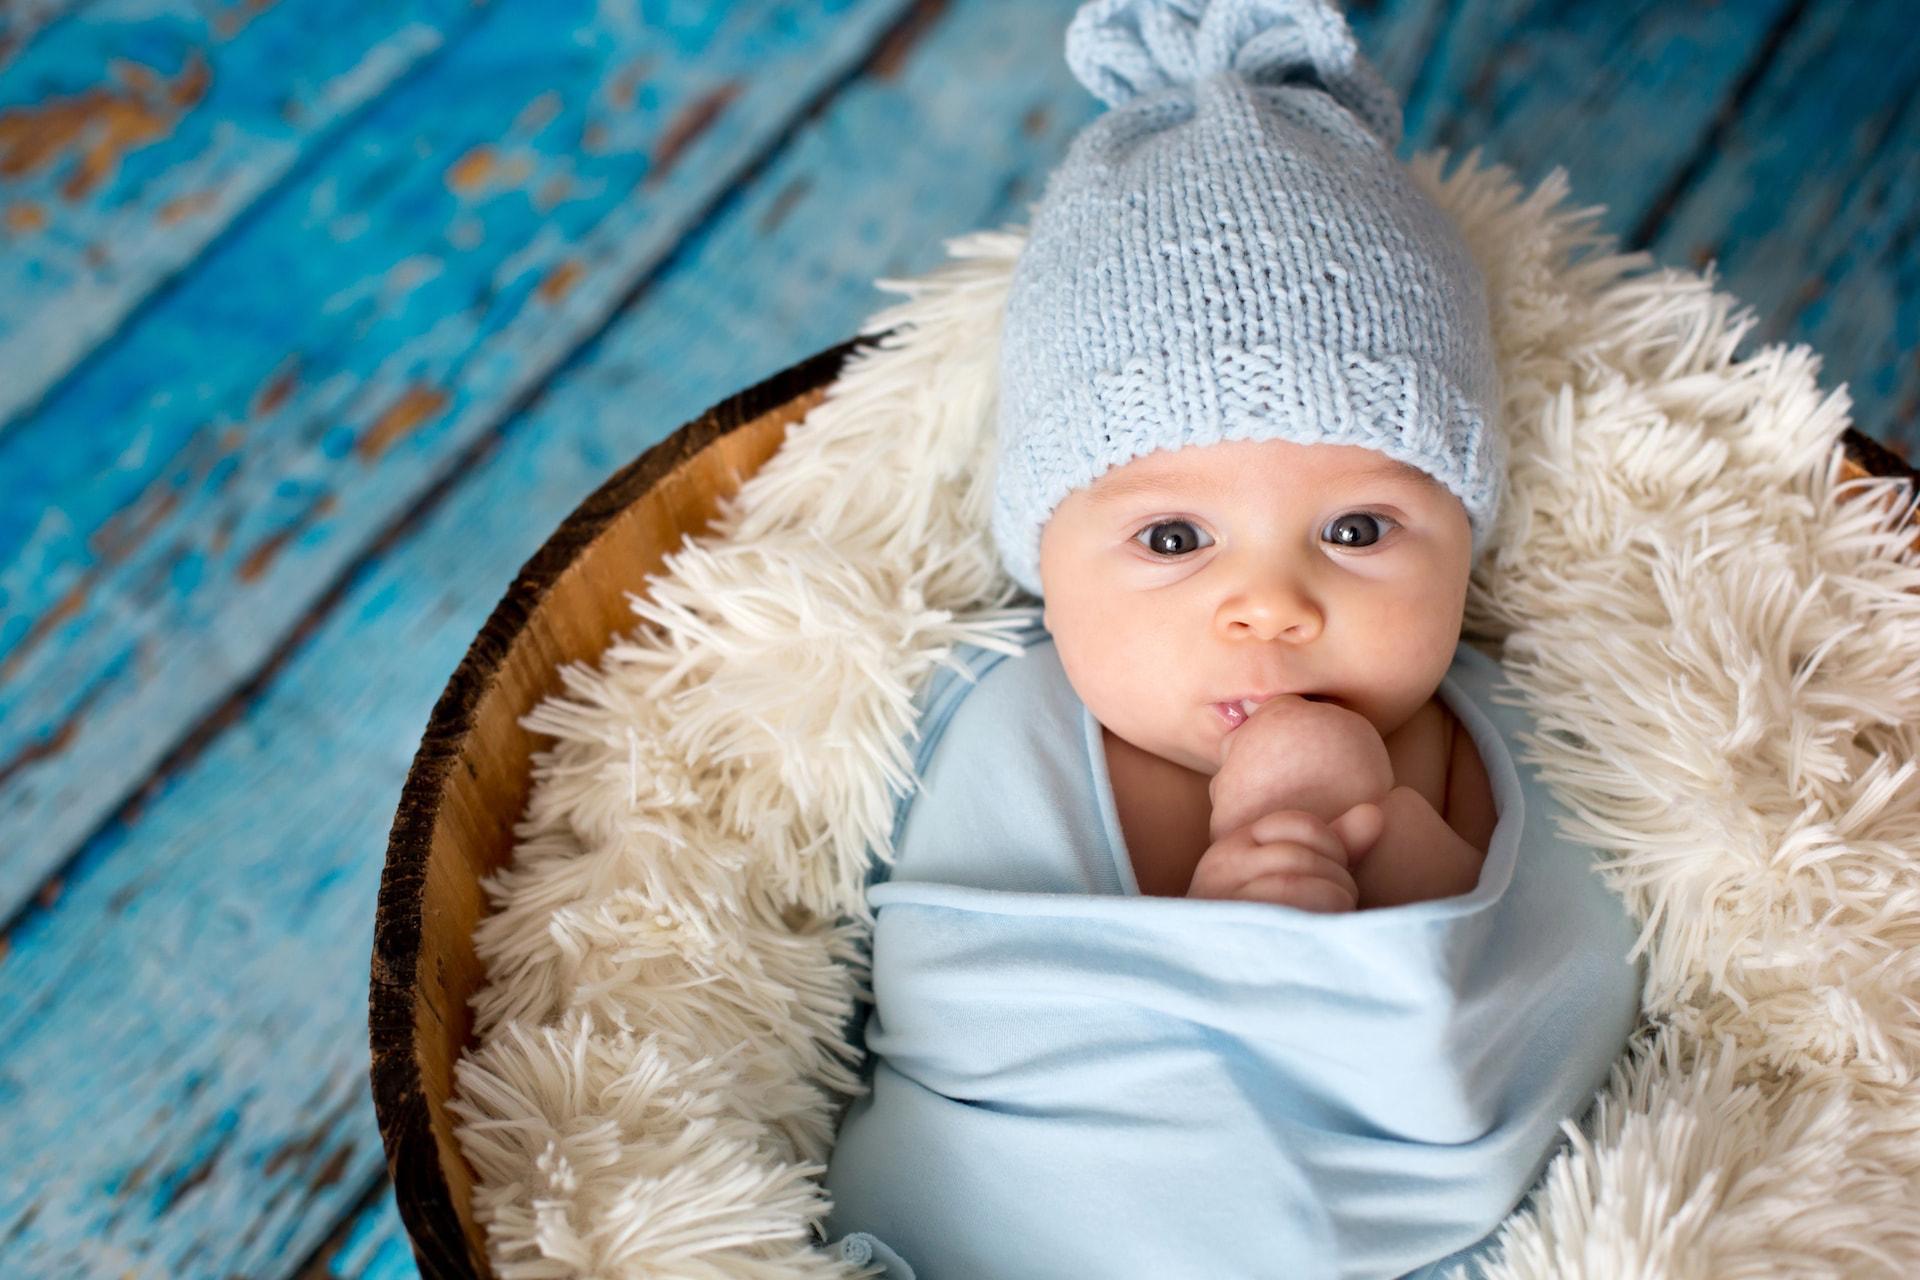 DNA Testing for Newborns: Why Wait? - featured